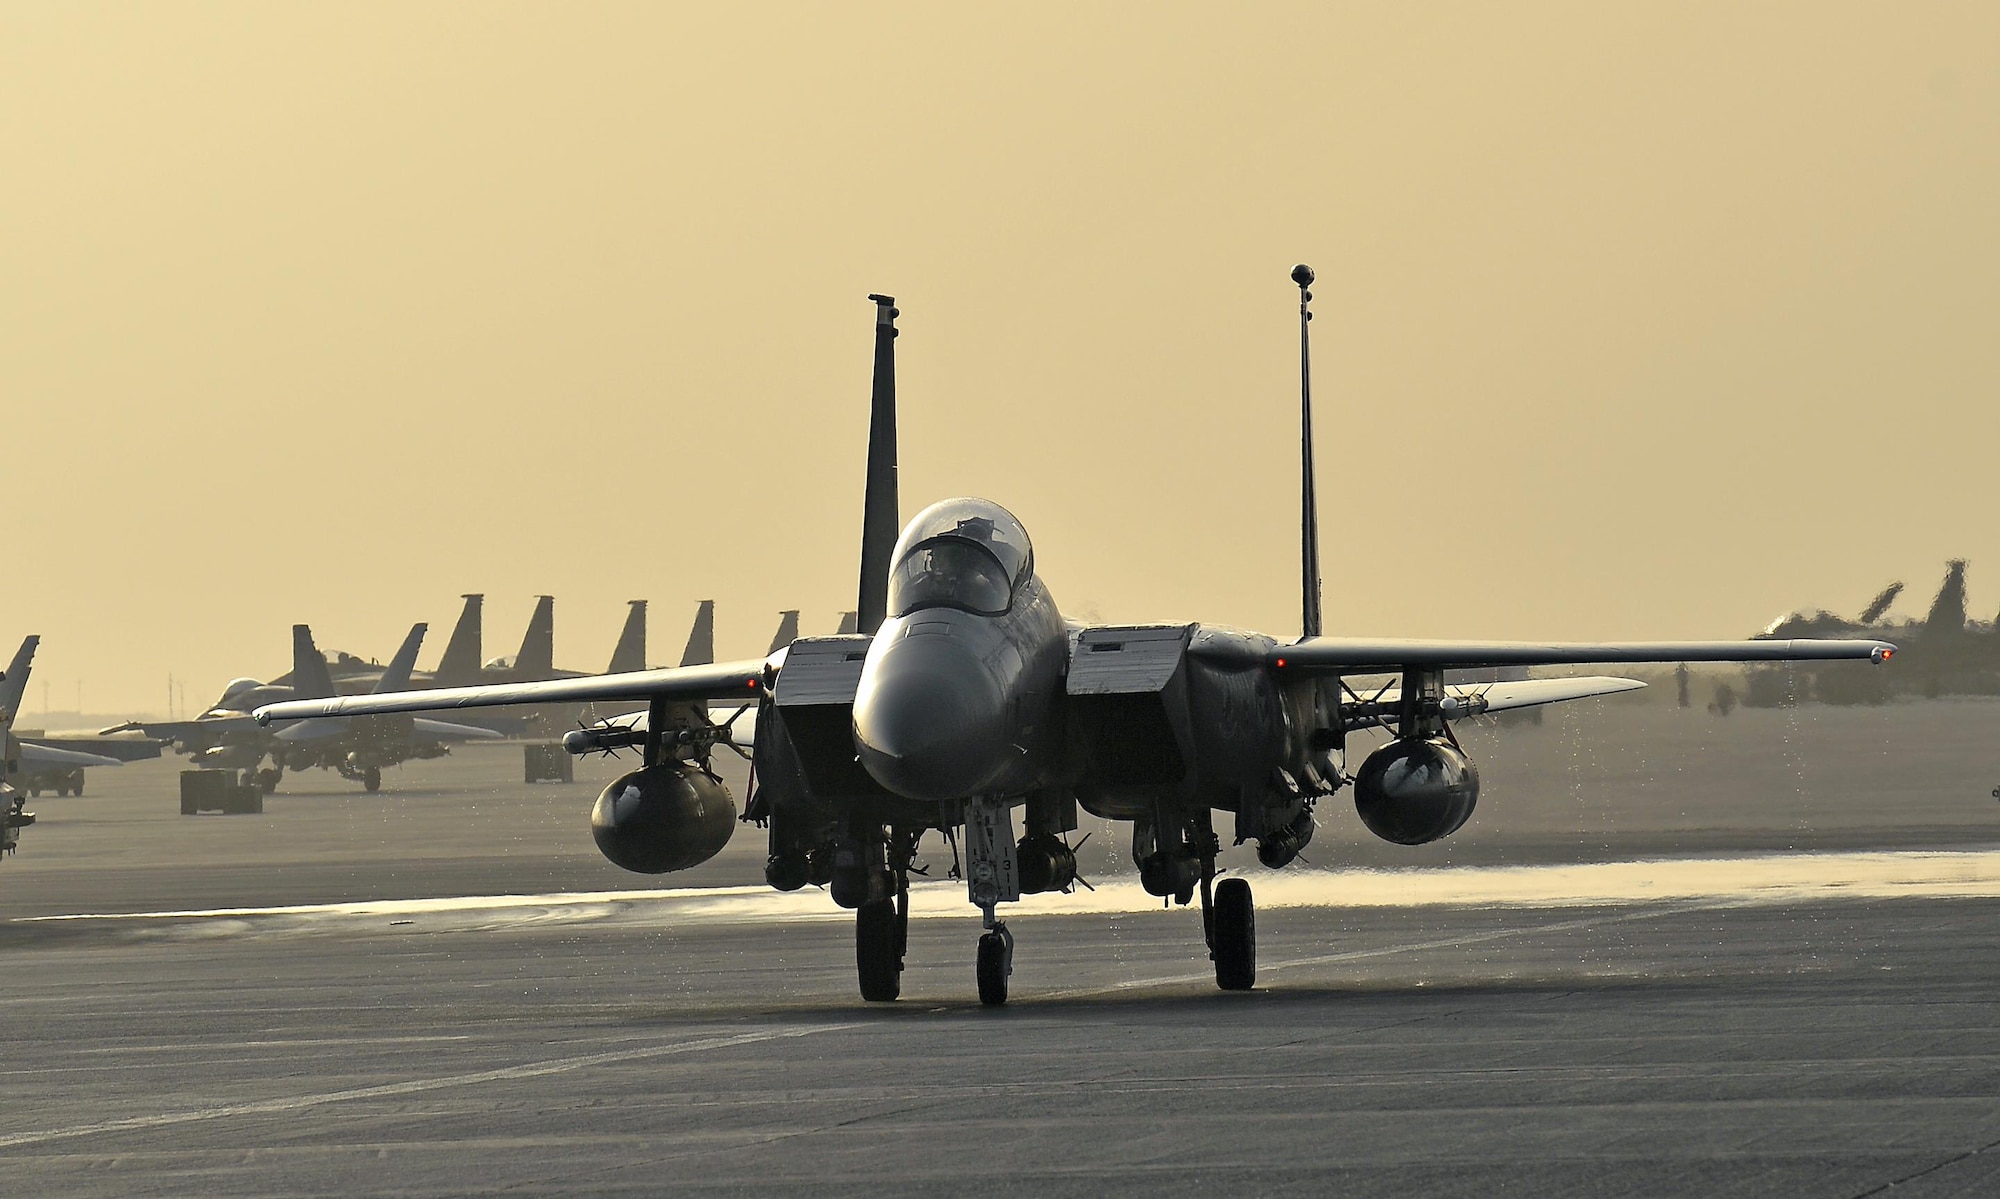 An F-15 taxis on the flight line in an undisclosed location in Southwest Asia. (U.S. Air Force photo by Tech Sgt. Jeff Andrejcik)